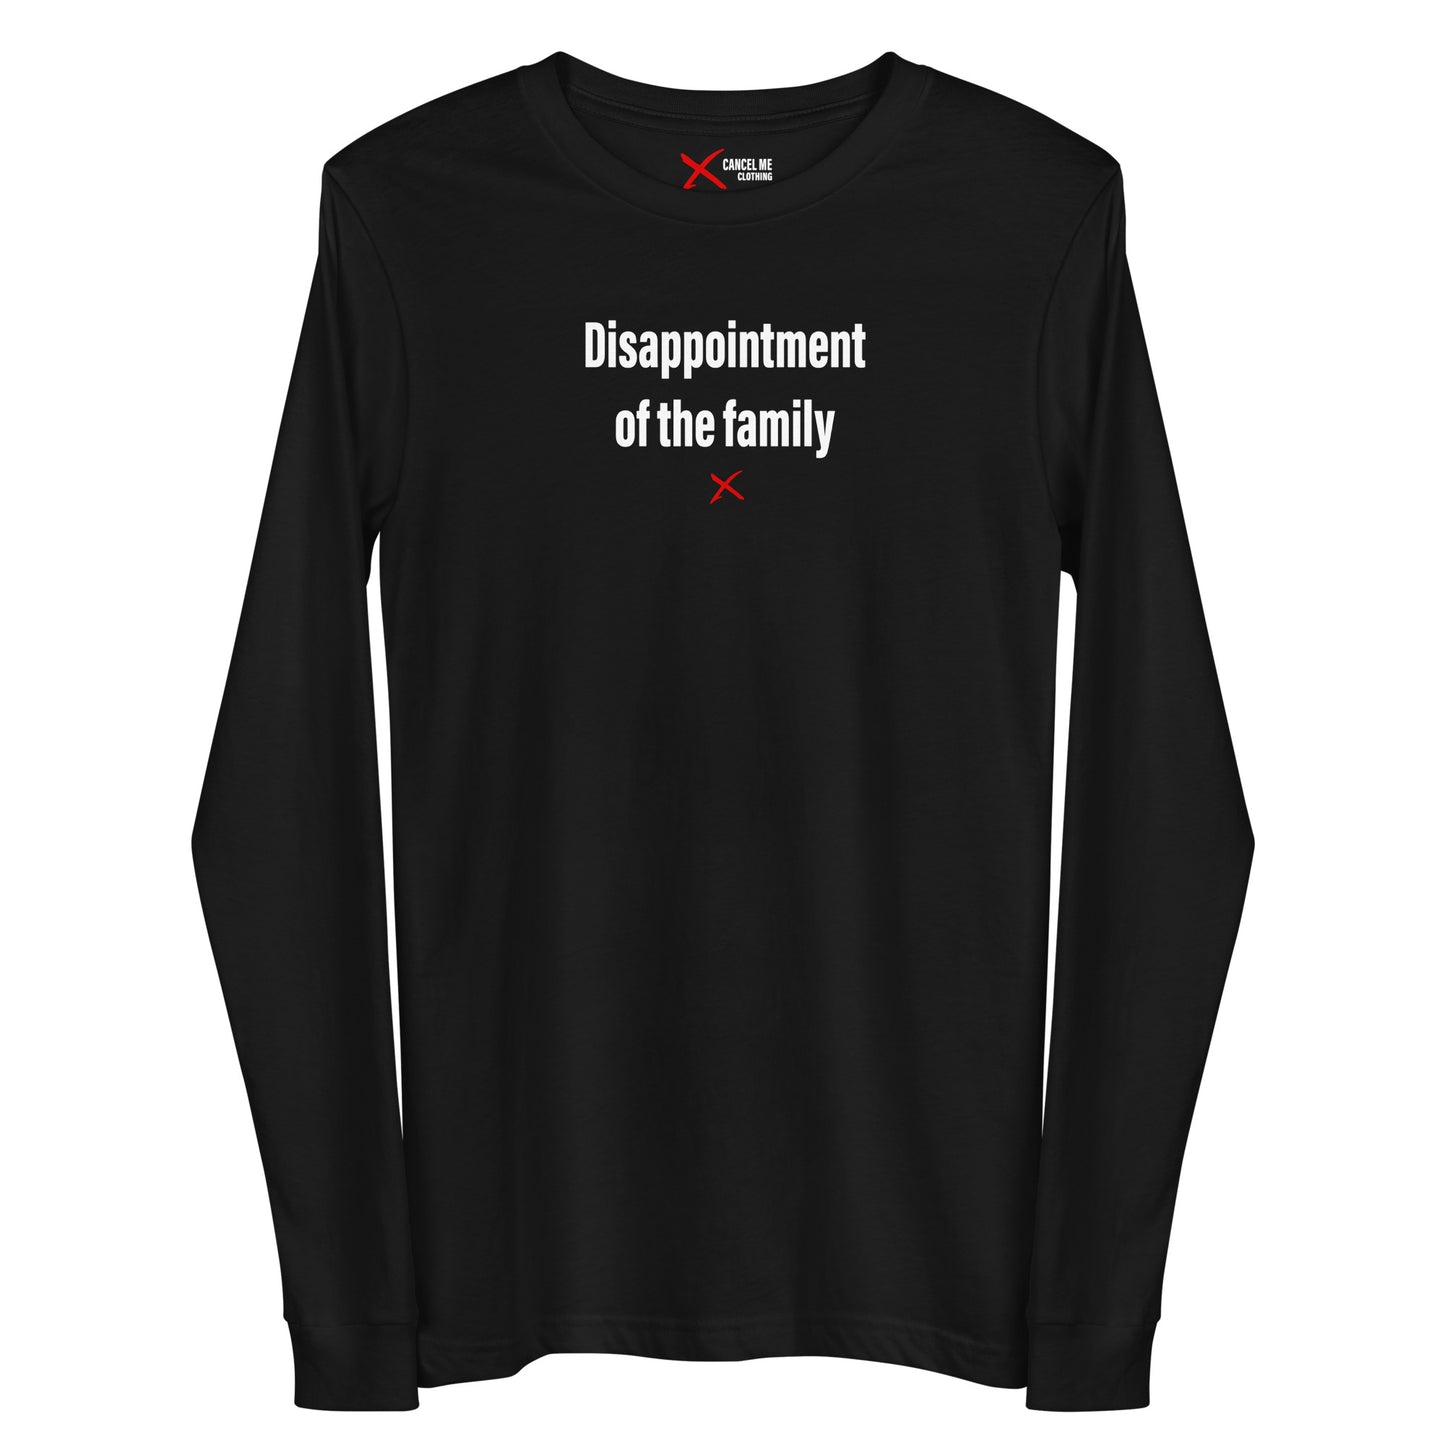 Disappointment of the family - Longsleeve